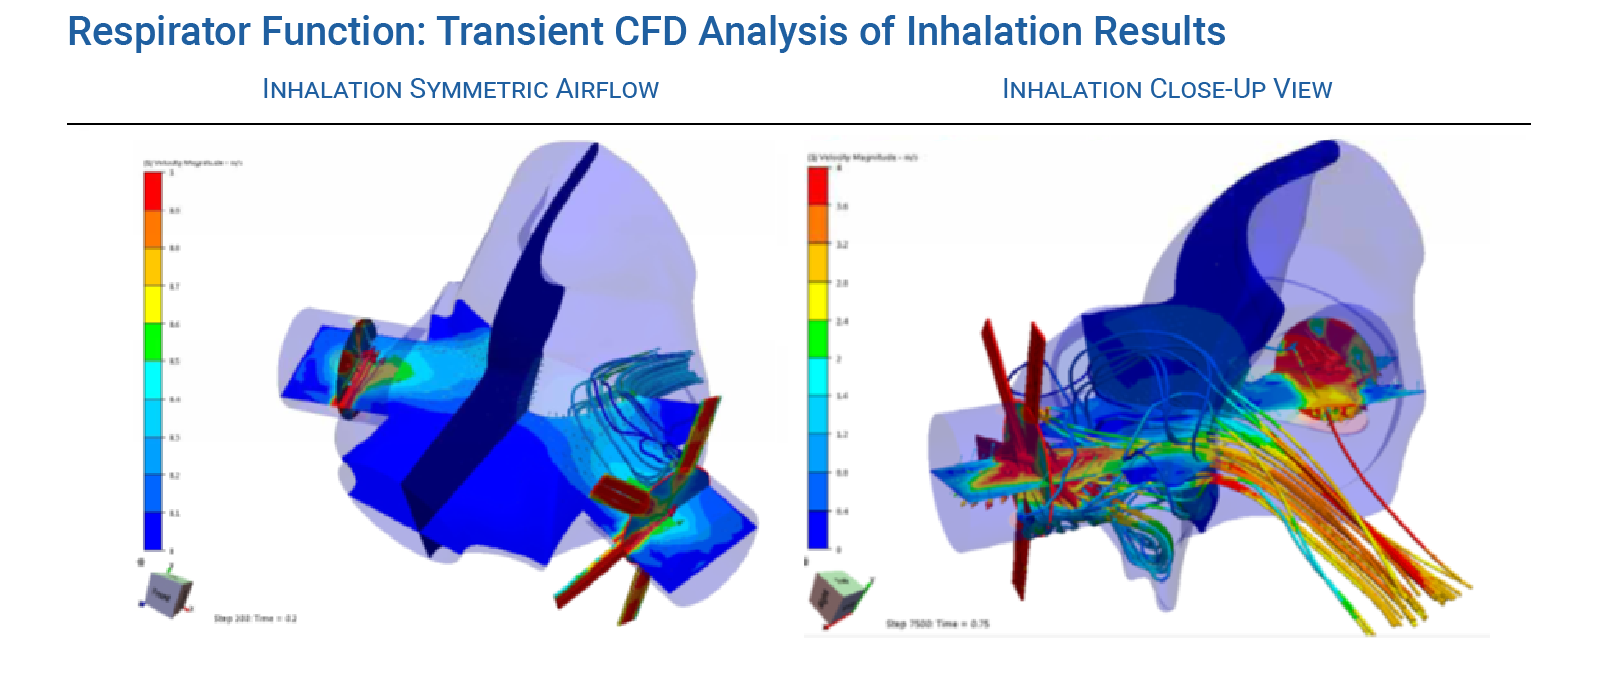 Respirator Mask Function During Breathing Transient CFD Analysis of Inhalation Results - Predictive Engineering CFD Consulting Services